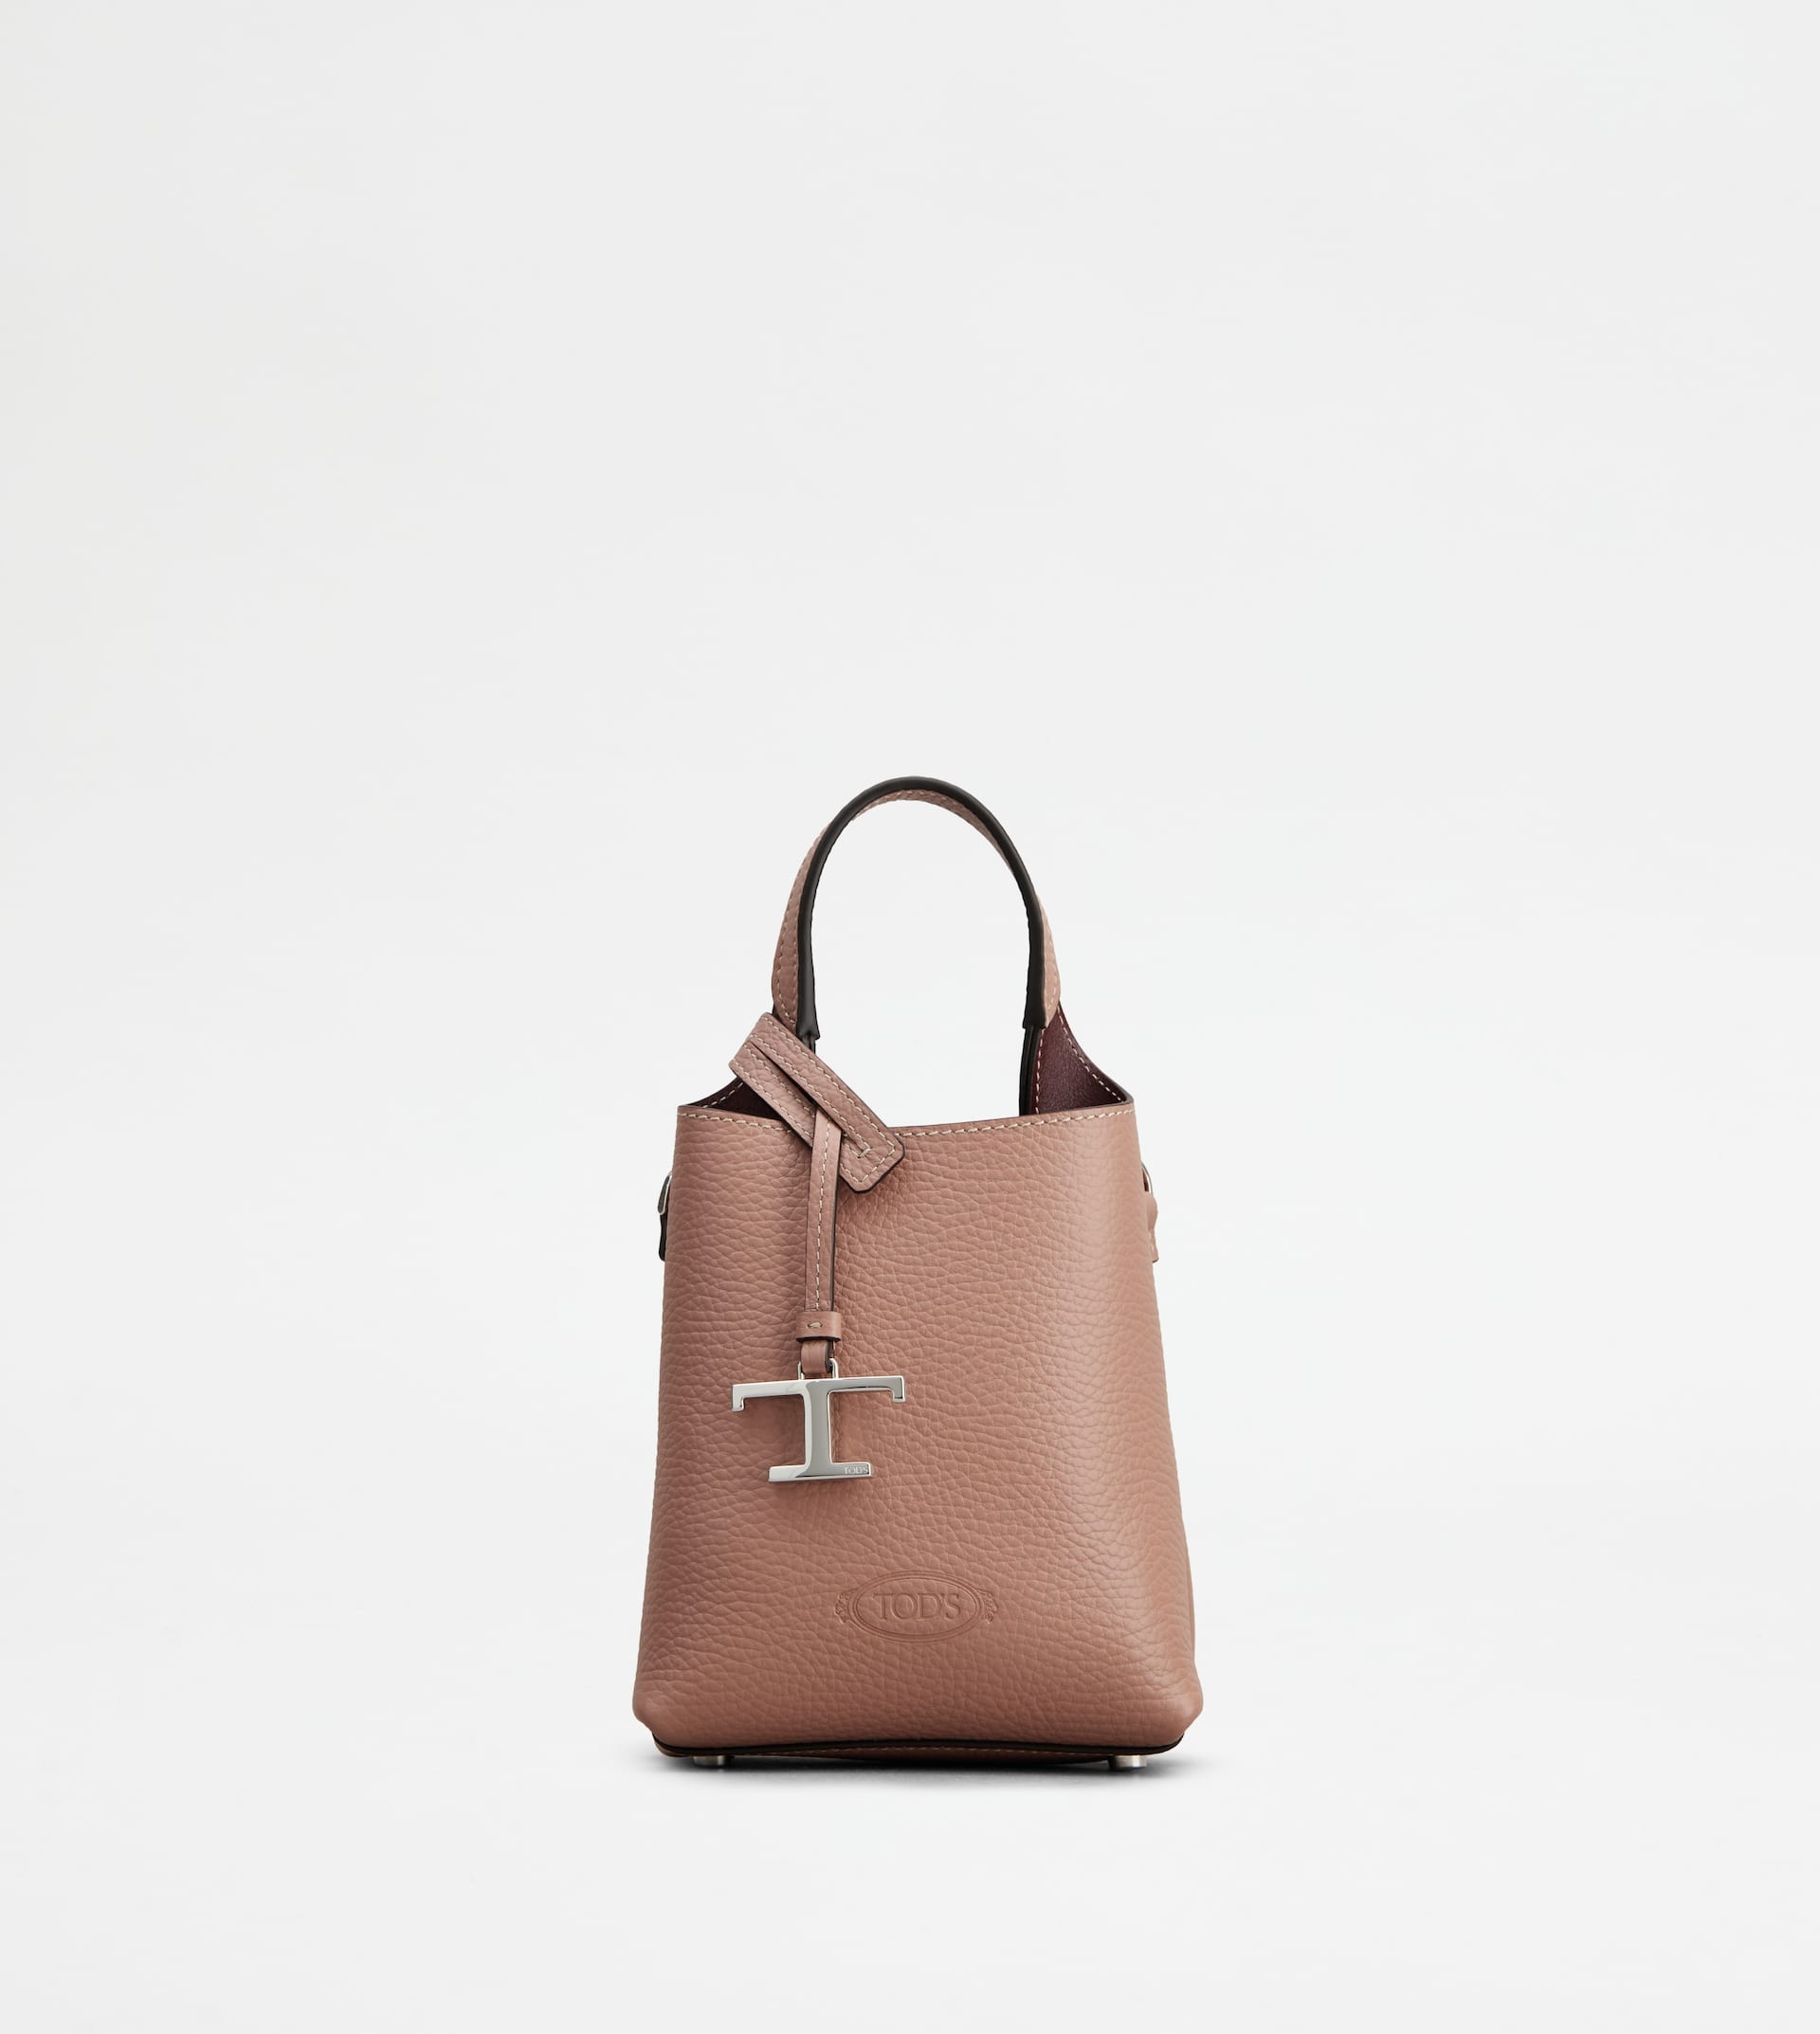 TOD'S MICRO BAG IN LEATHER - BURGUNDY, PINK - 1